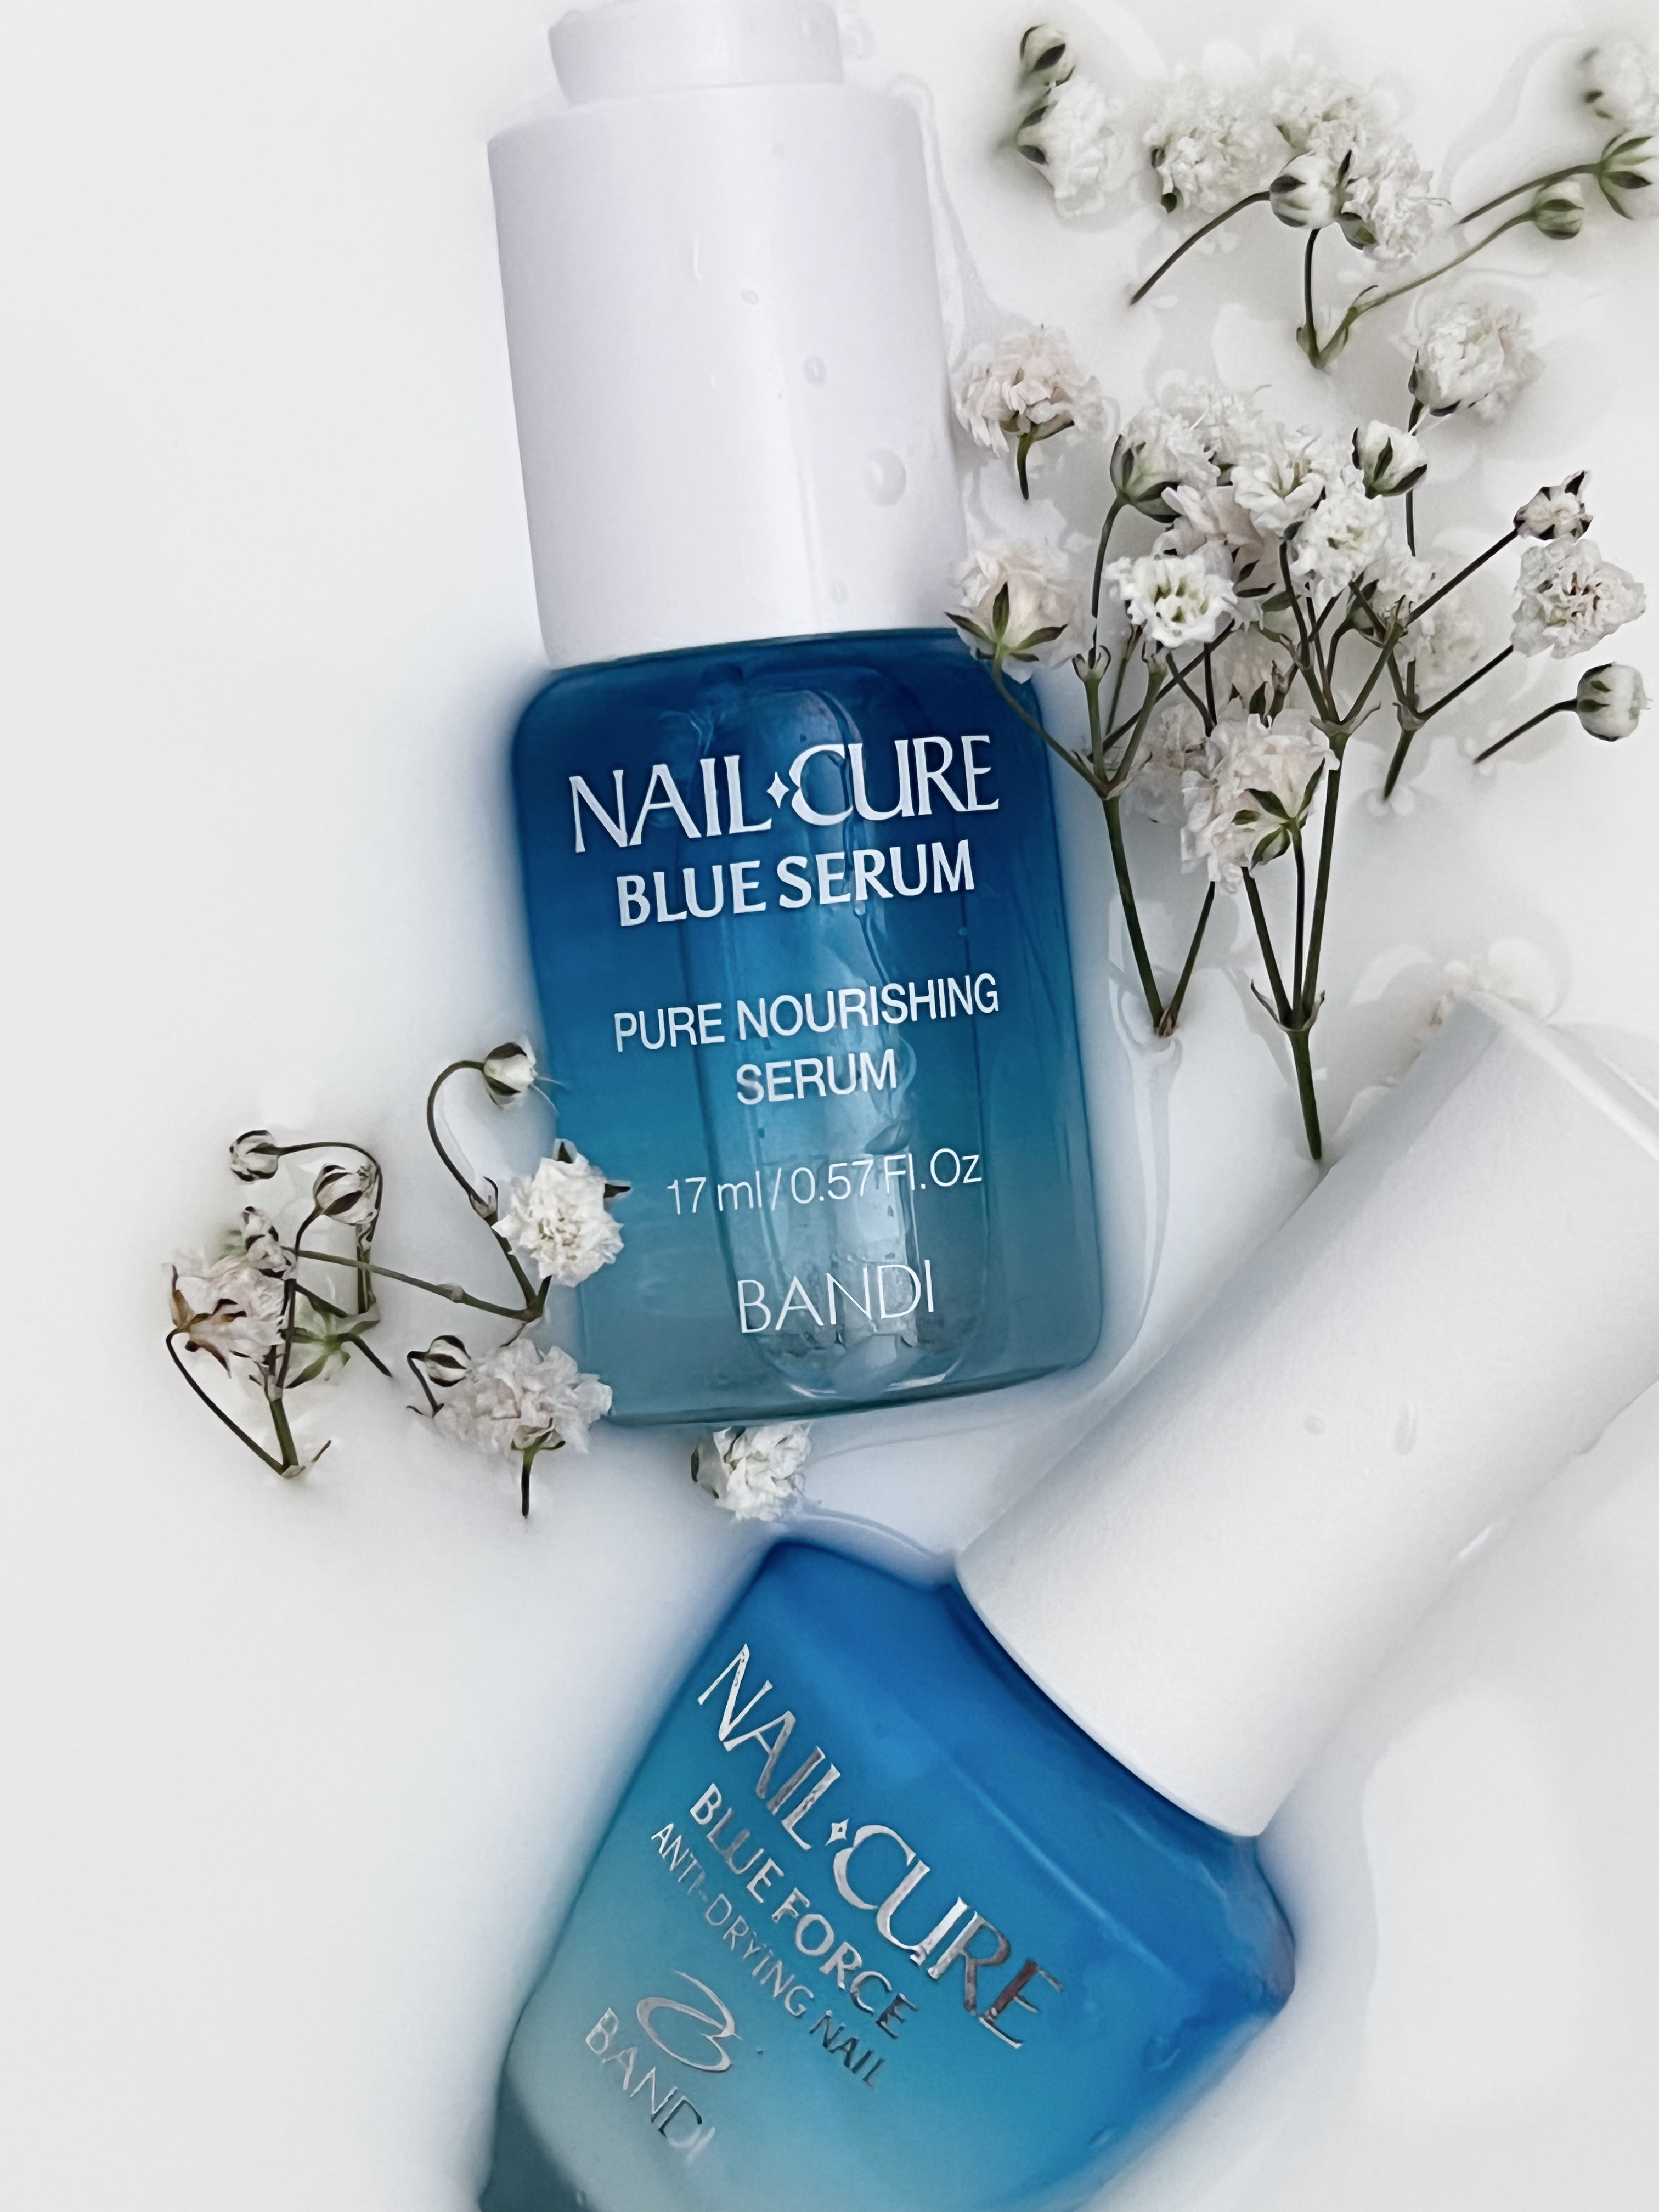 NAILCURE